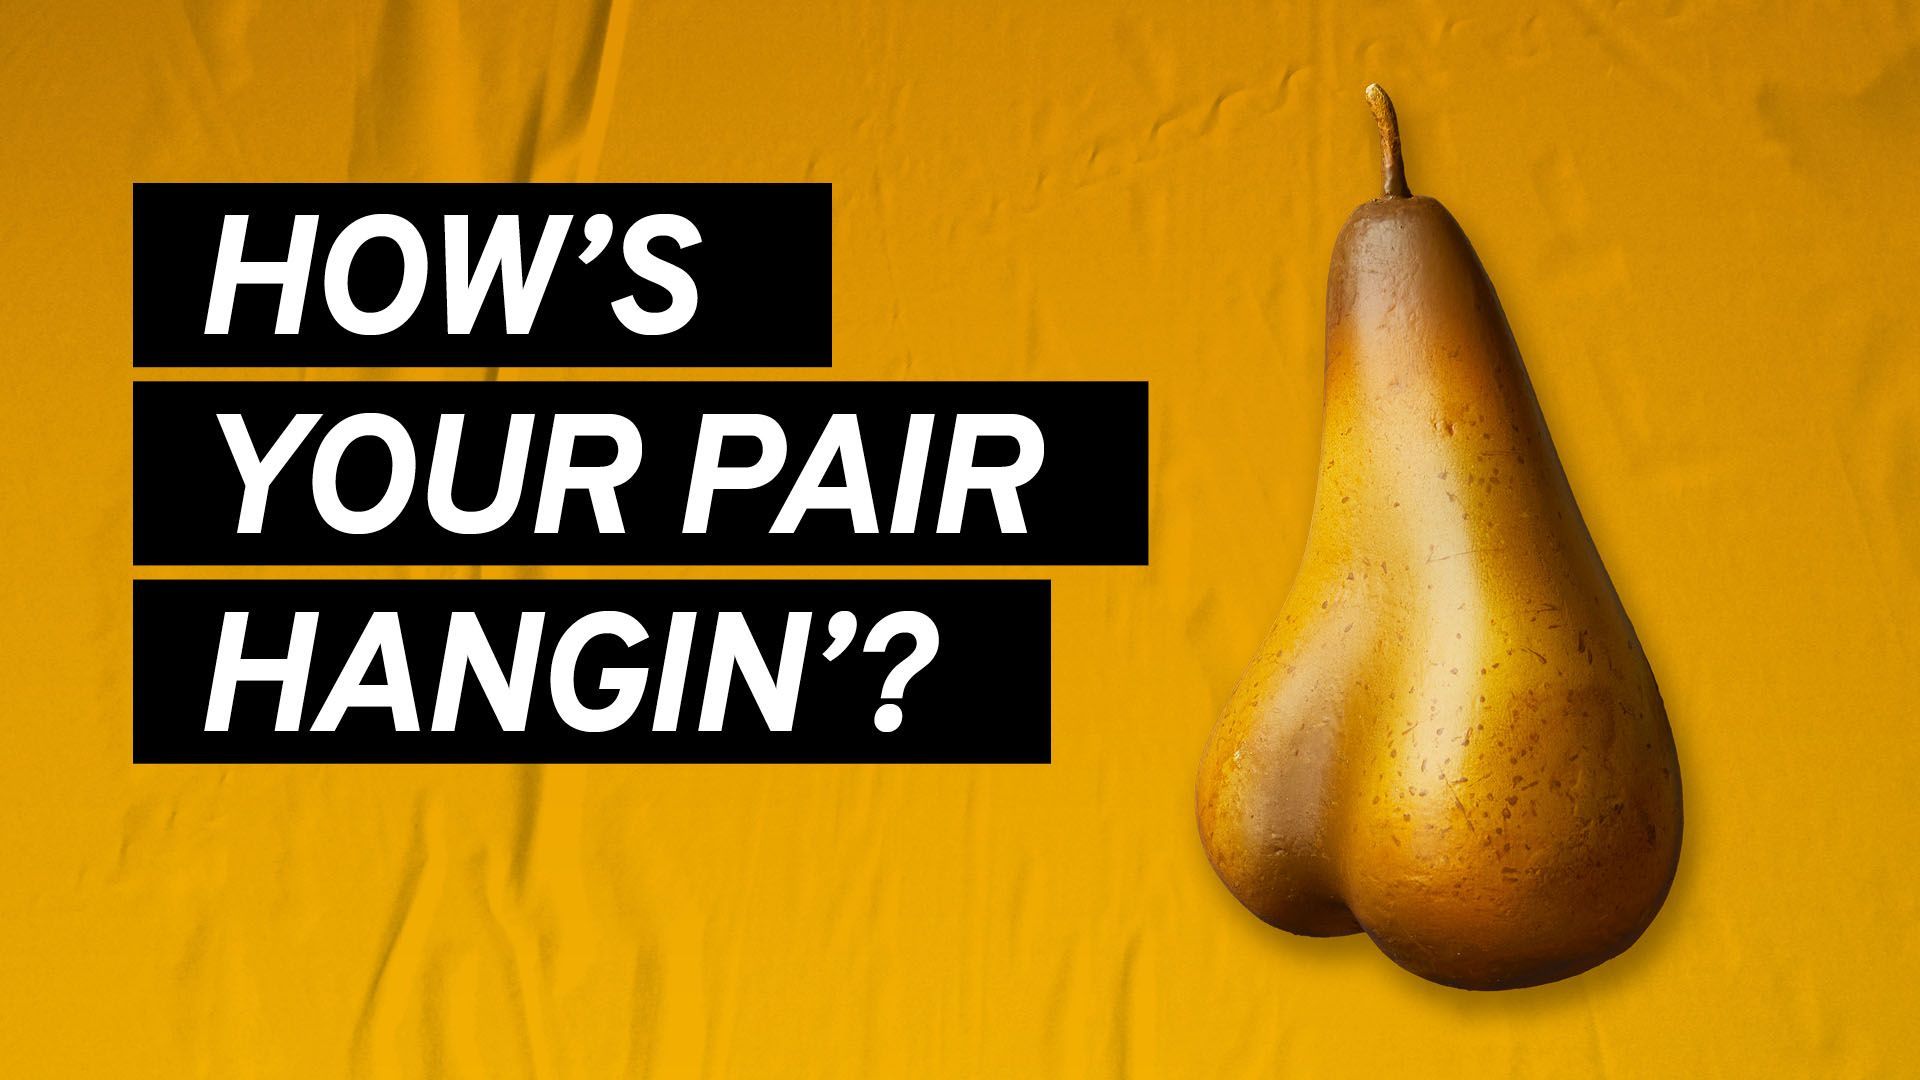 An image of a pear. Superimposed text says: "How's your pair your pair hangin'?"